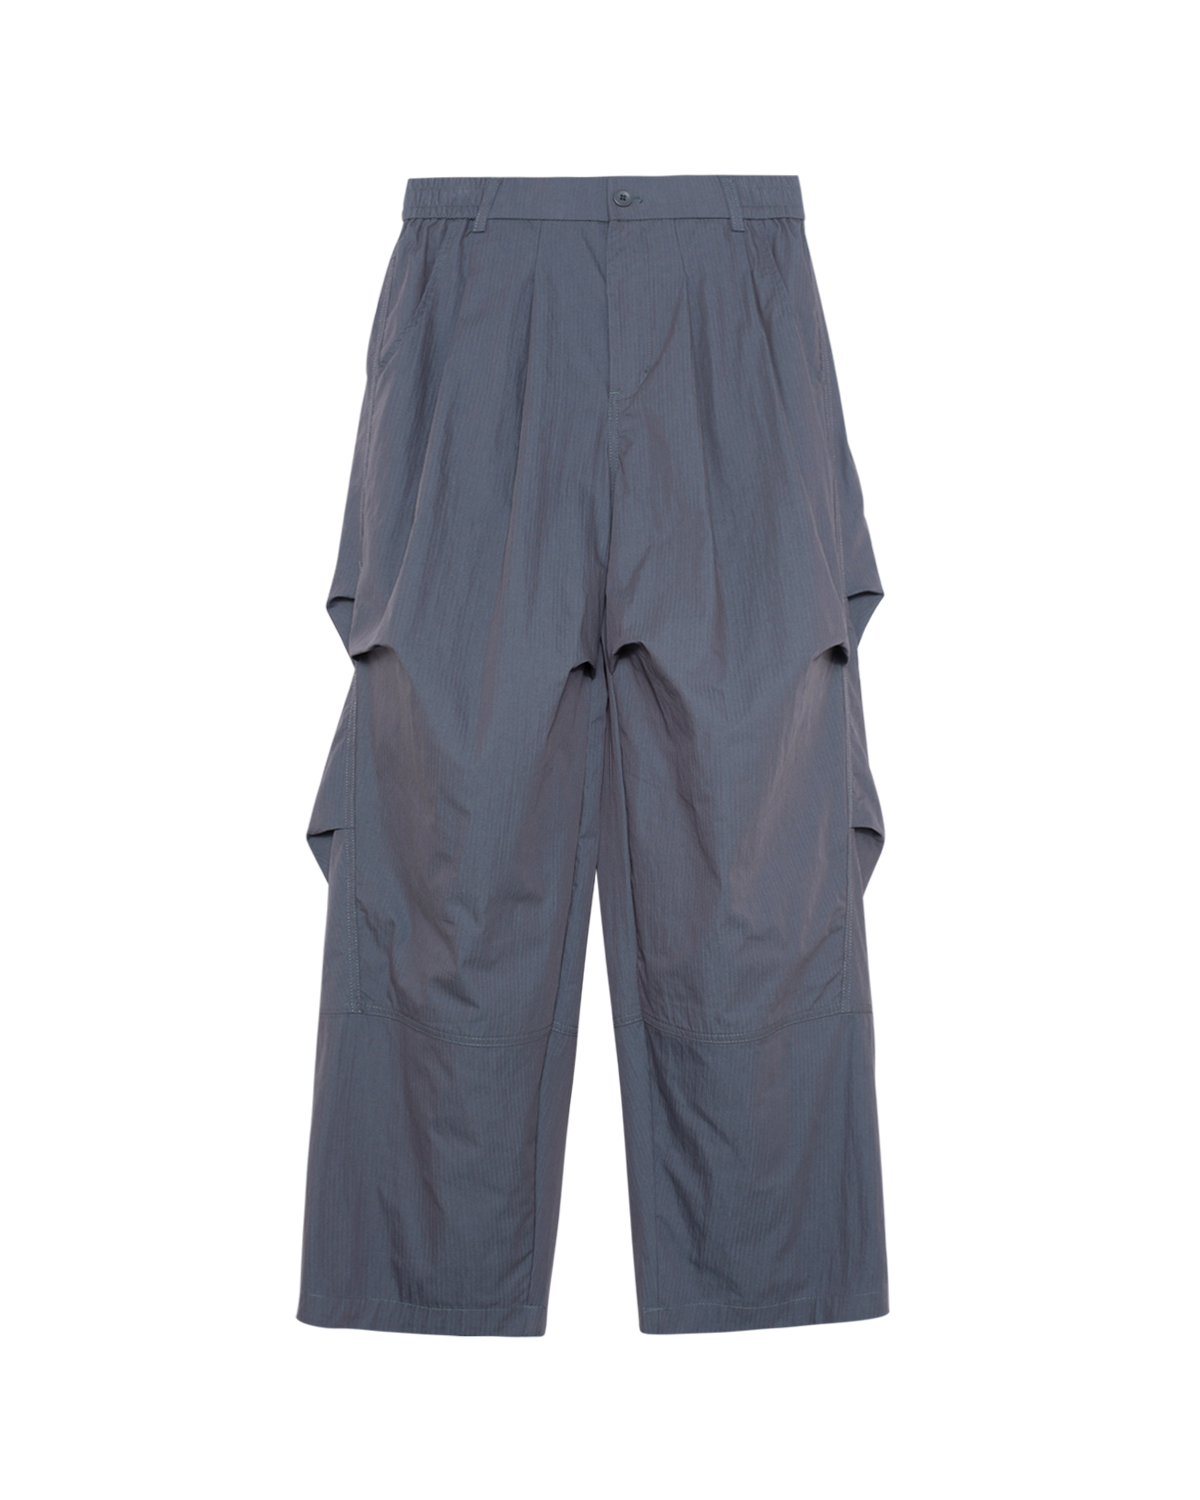 Off The Label deconstruction flare effect cargo pants